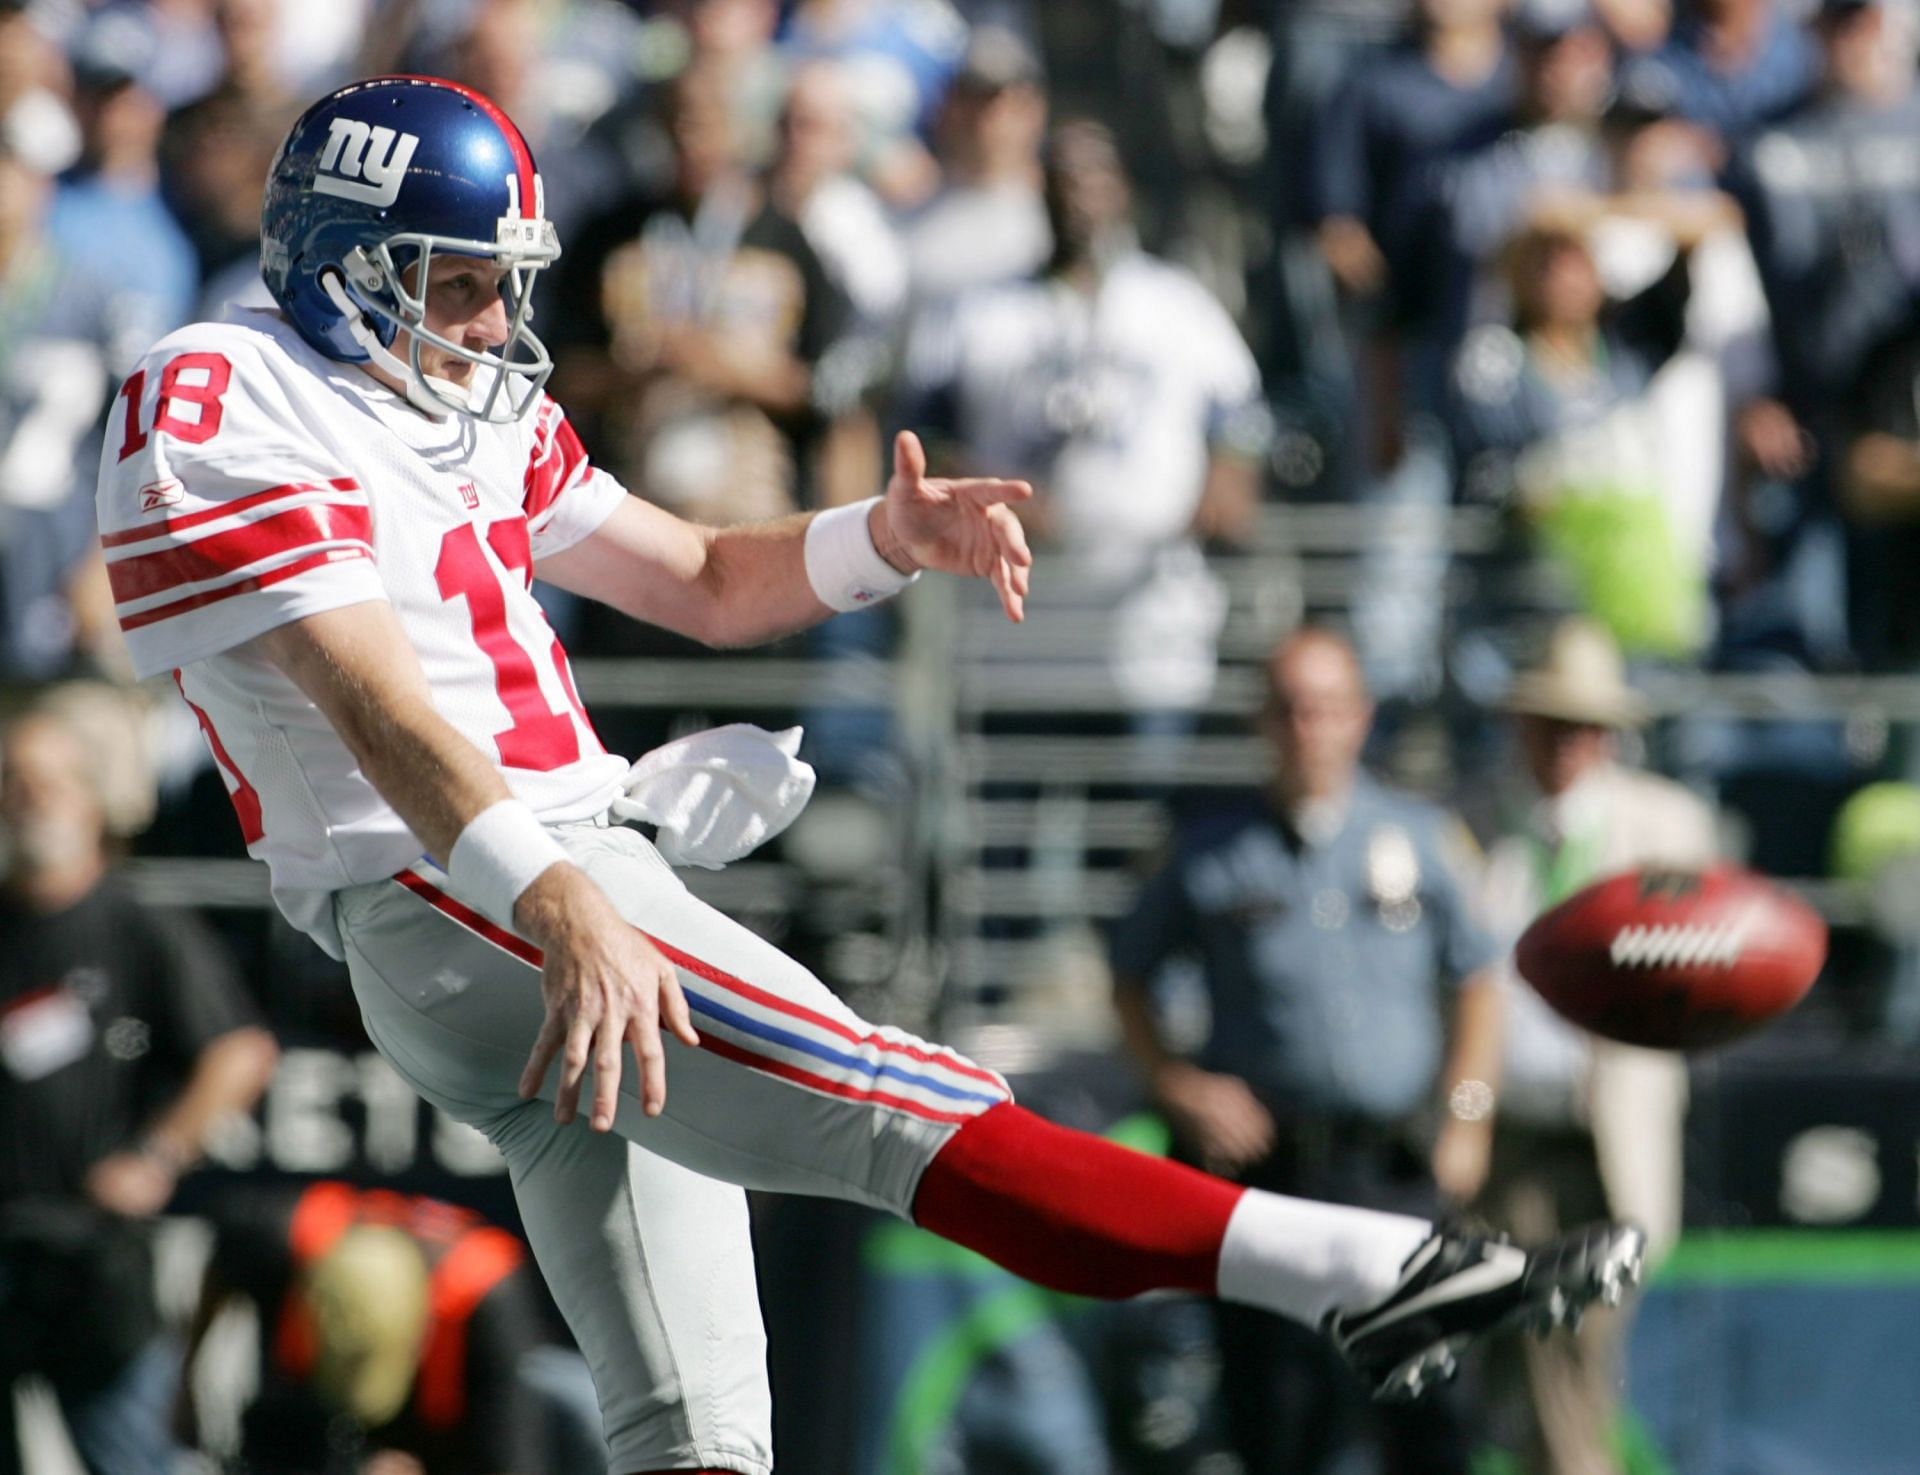 Feagles, seen in 2006, spent the last seven seasons of his career with the New York Giants (Photo: Getty)